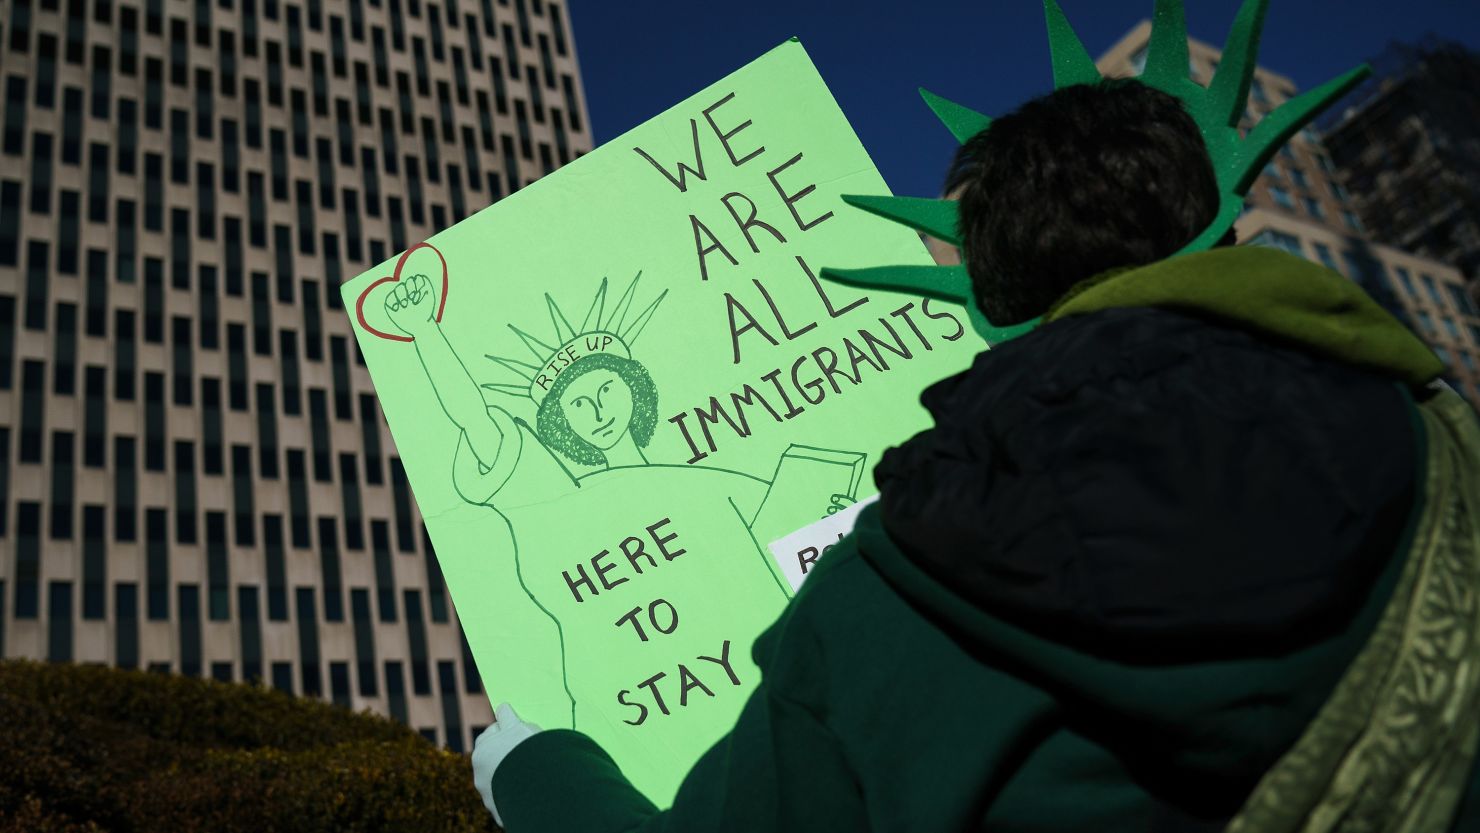 NEW YORK, NY - JANUARY 18: Immigration activists and clergy members participate in a silent prayer walk in protest against the Trump administration's immigration policies outside the U.S. Citizenship and Immigration Services offices, housed in the Jacob Javits Federal Building, January 18, 2018 in New York City. Yesterday, White House Chief of Staff John Kelly said President Trump will not support an extension of DACA (Deferred Action for Childhood Arrivals) or an immigration reform bill unless it includes upwards of $20 billion in funding for a southern border wall. (Photo by Drew Angerer/Getty Images)